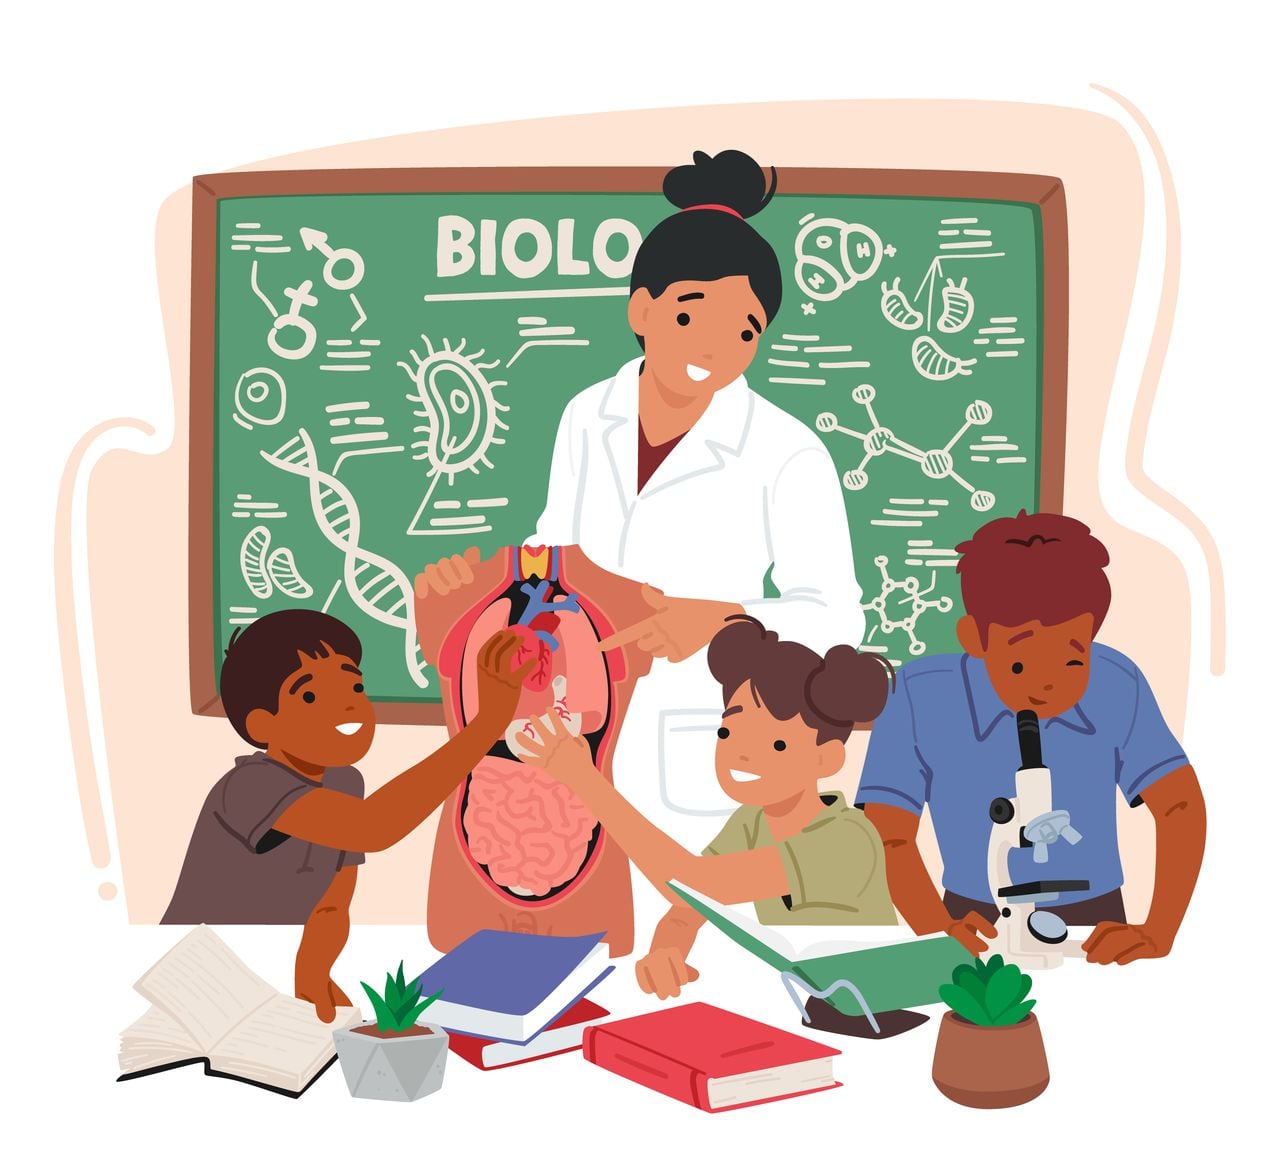 Passionate Biology Teacher Engages Curious Kids In Classroom, Fostering A Love For Science As They Explore The Wonders Of Life Through Interactive Lessons And Hands-on Experiments. Vector Illustration